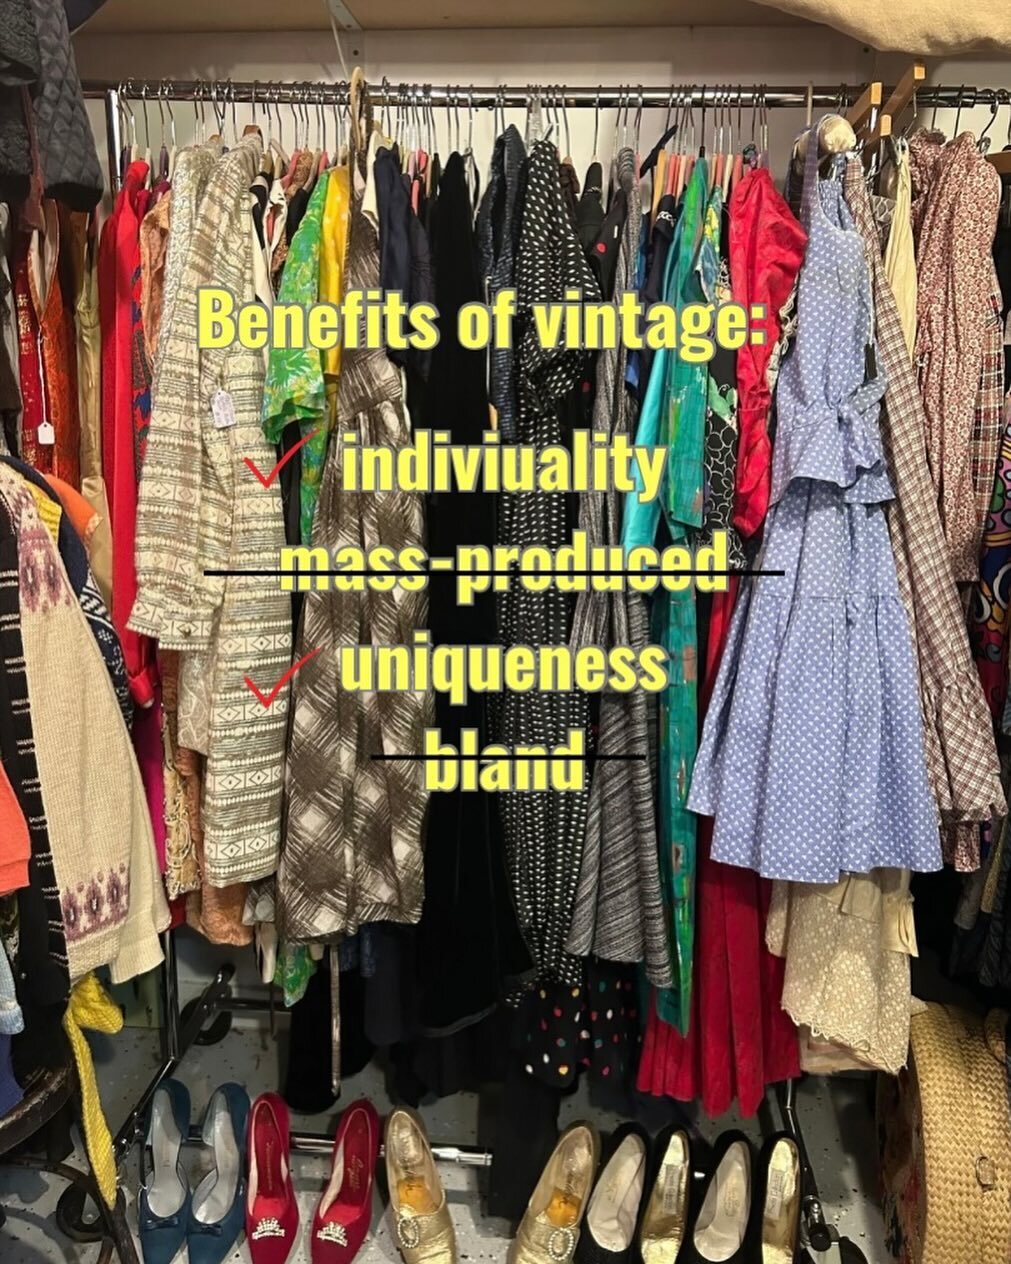 You don&rsquo;t have to shop vintage, but research suggests it&rsquo;s a good idea&hellip;

Studies show shopping vintage helps to create identity and image in a way that feels more authentic.

So while big box stores are always an option, don&rsquo;